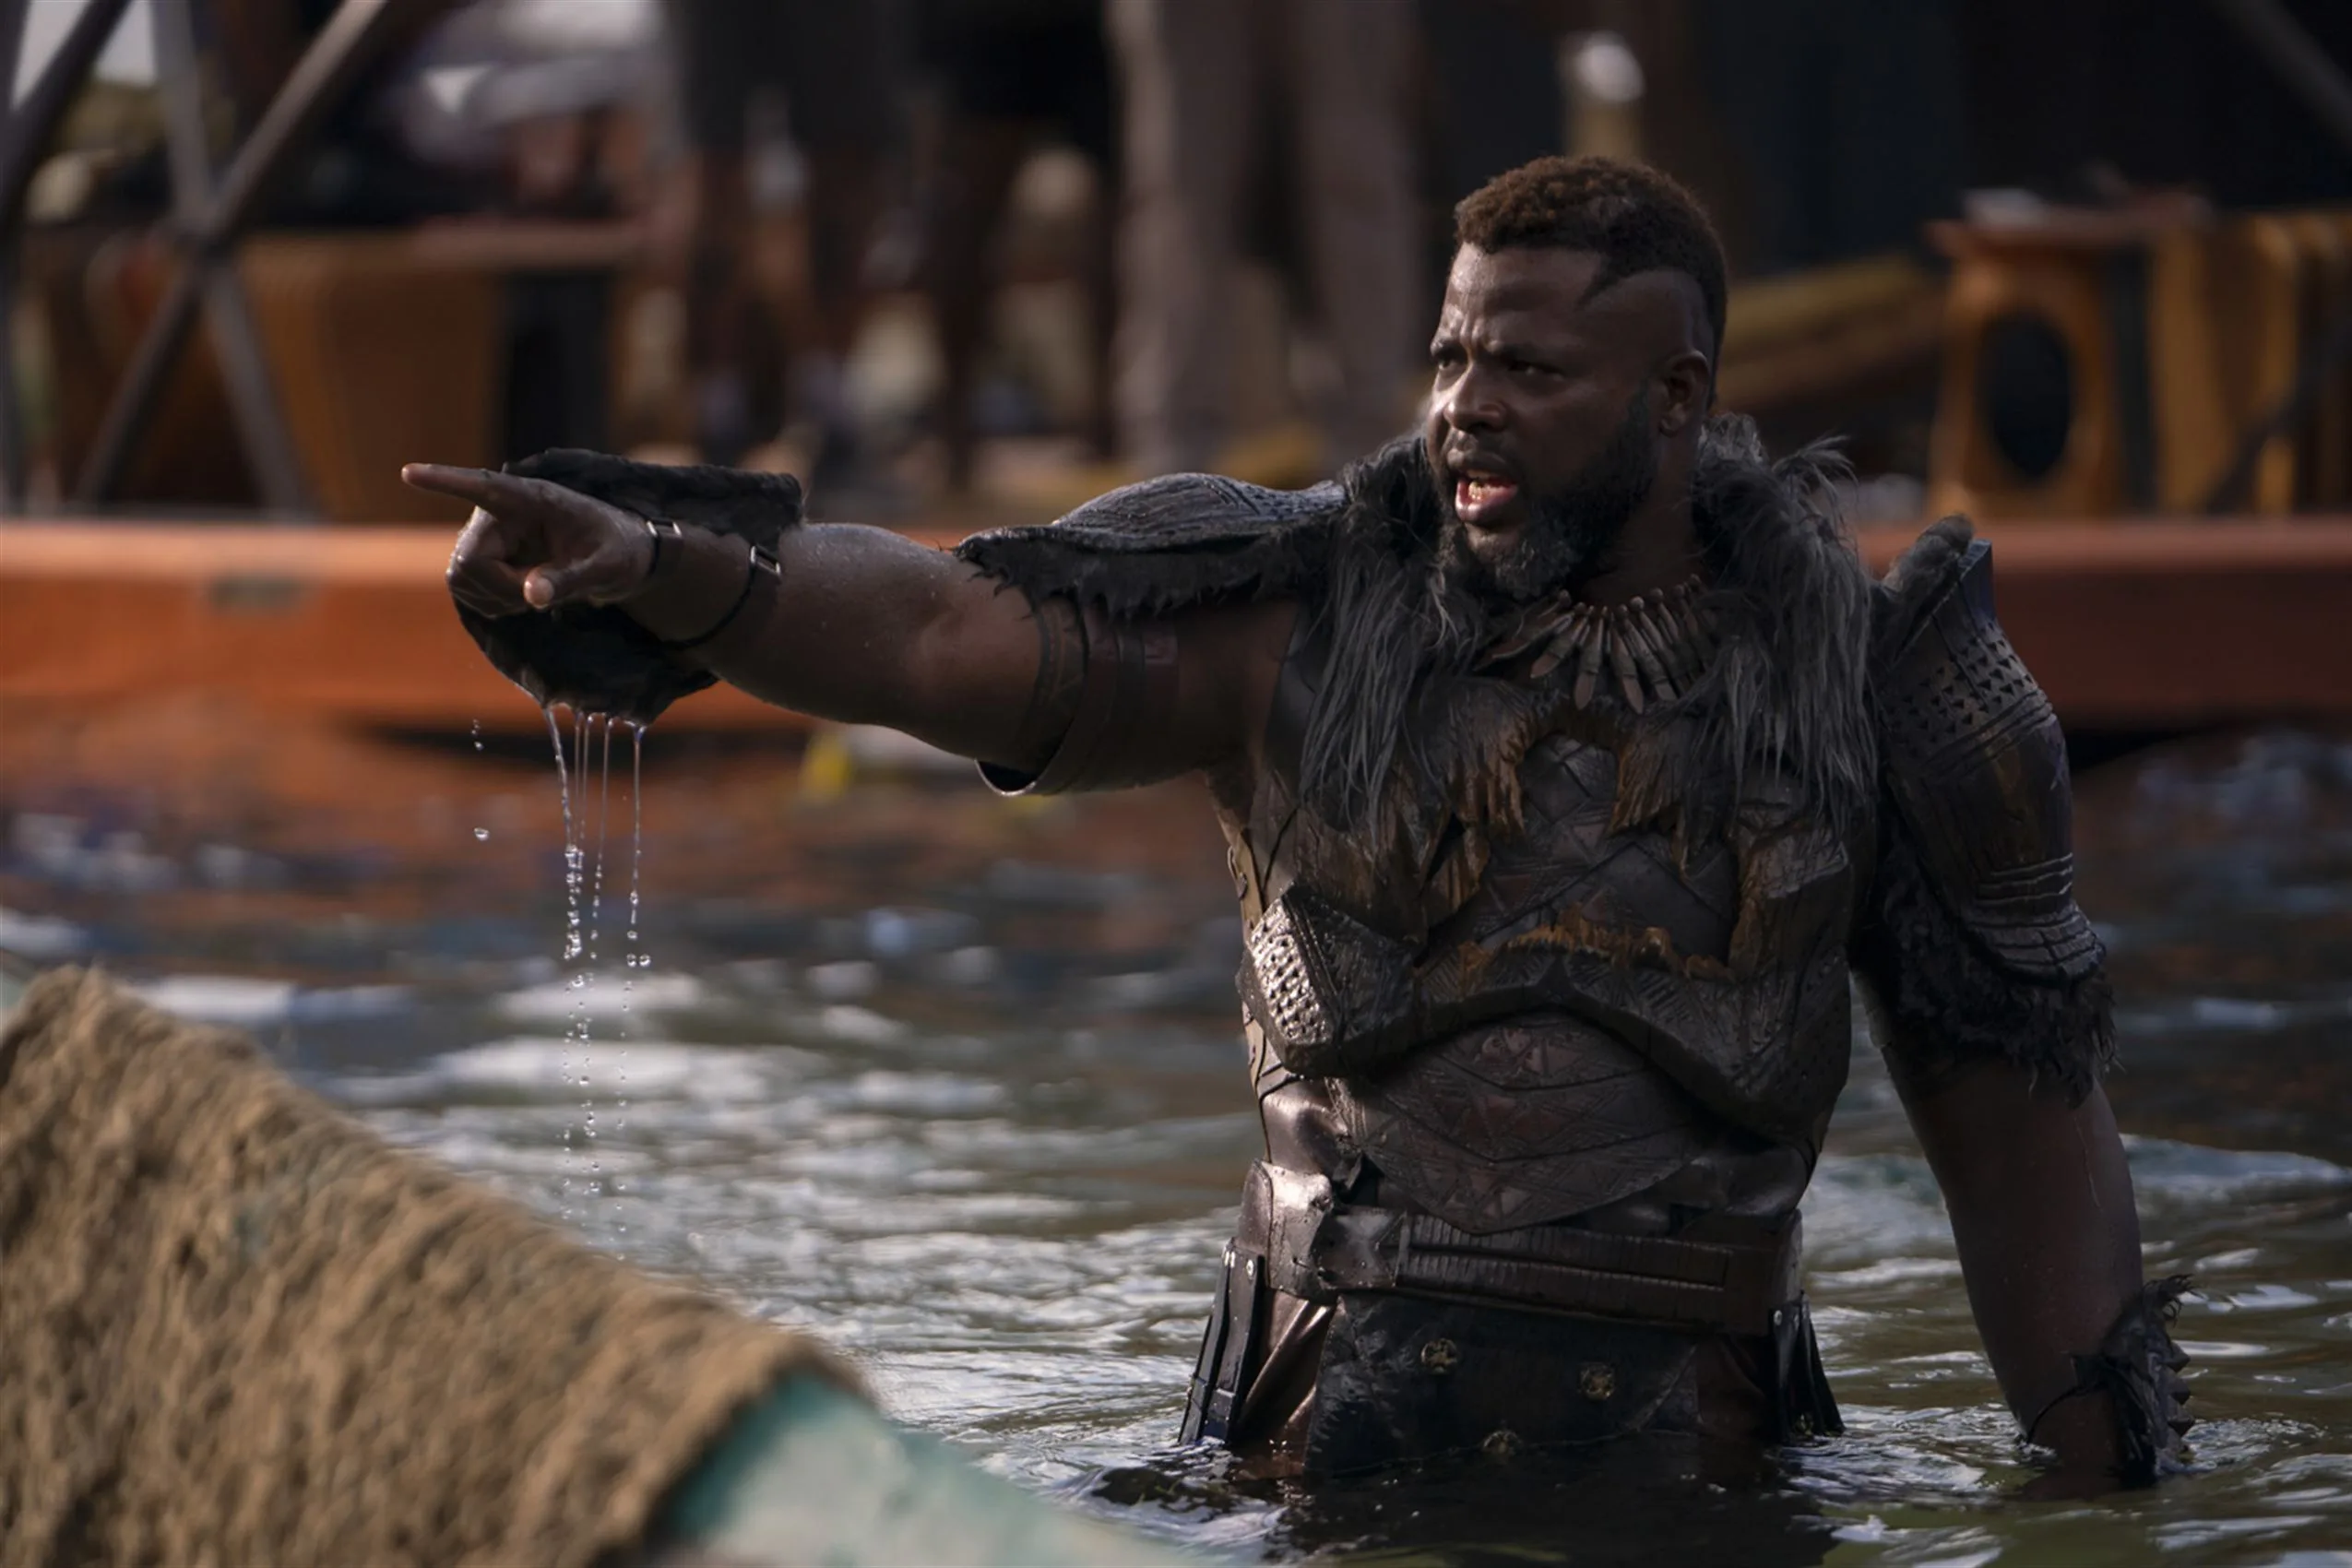 M'Baku (played by Winston Duke) points offscreen while waist-deep in water